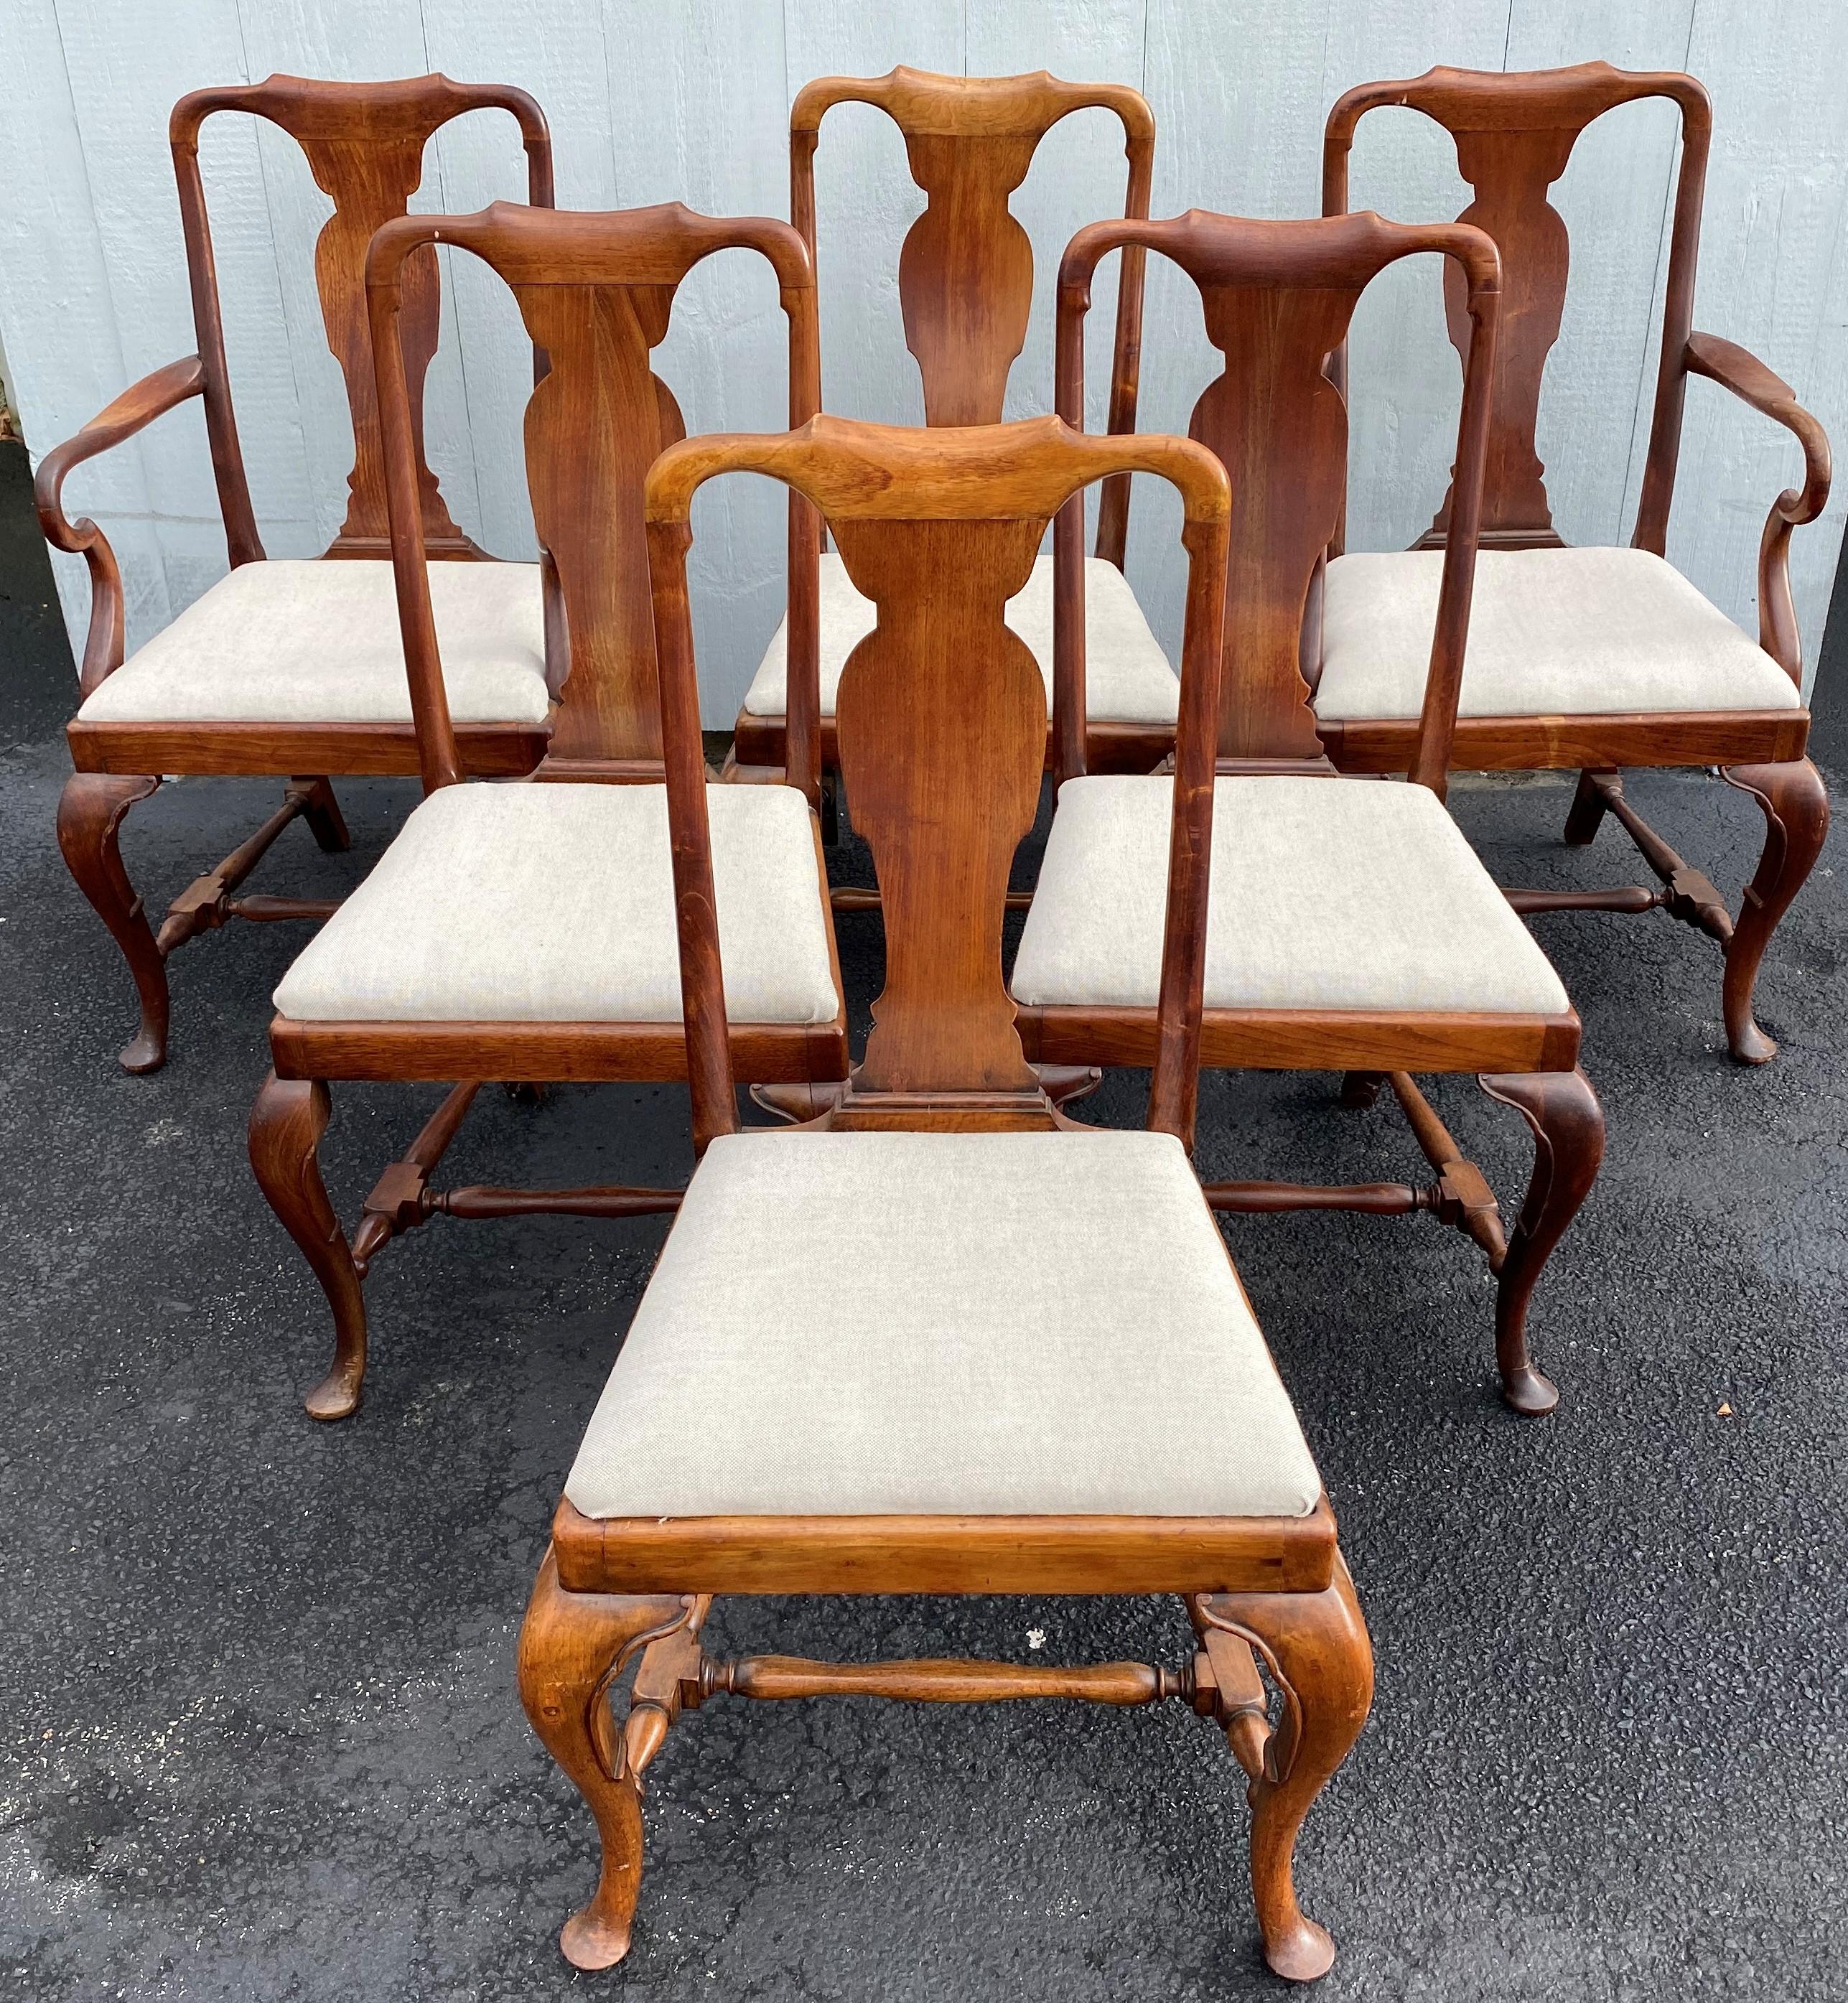 A fine set of six Queen Anne style mahogany dining chairs, including two armchairs and four side chairs, each with spoon backs and cream colored reupholstered slip seats, front carved cabriole legs with pad feet, H form turned stretchers, and